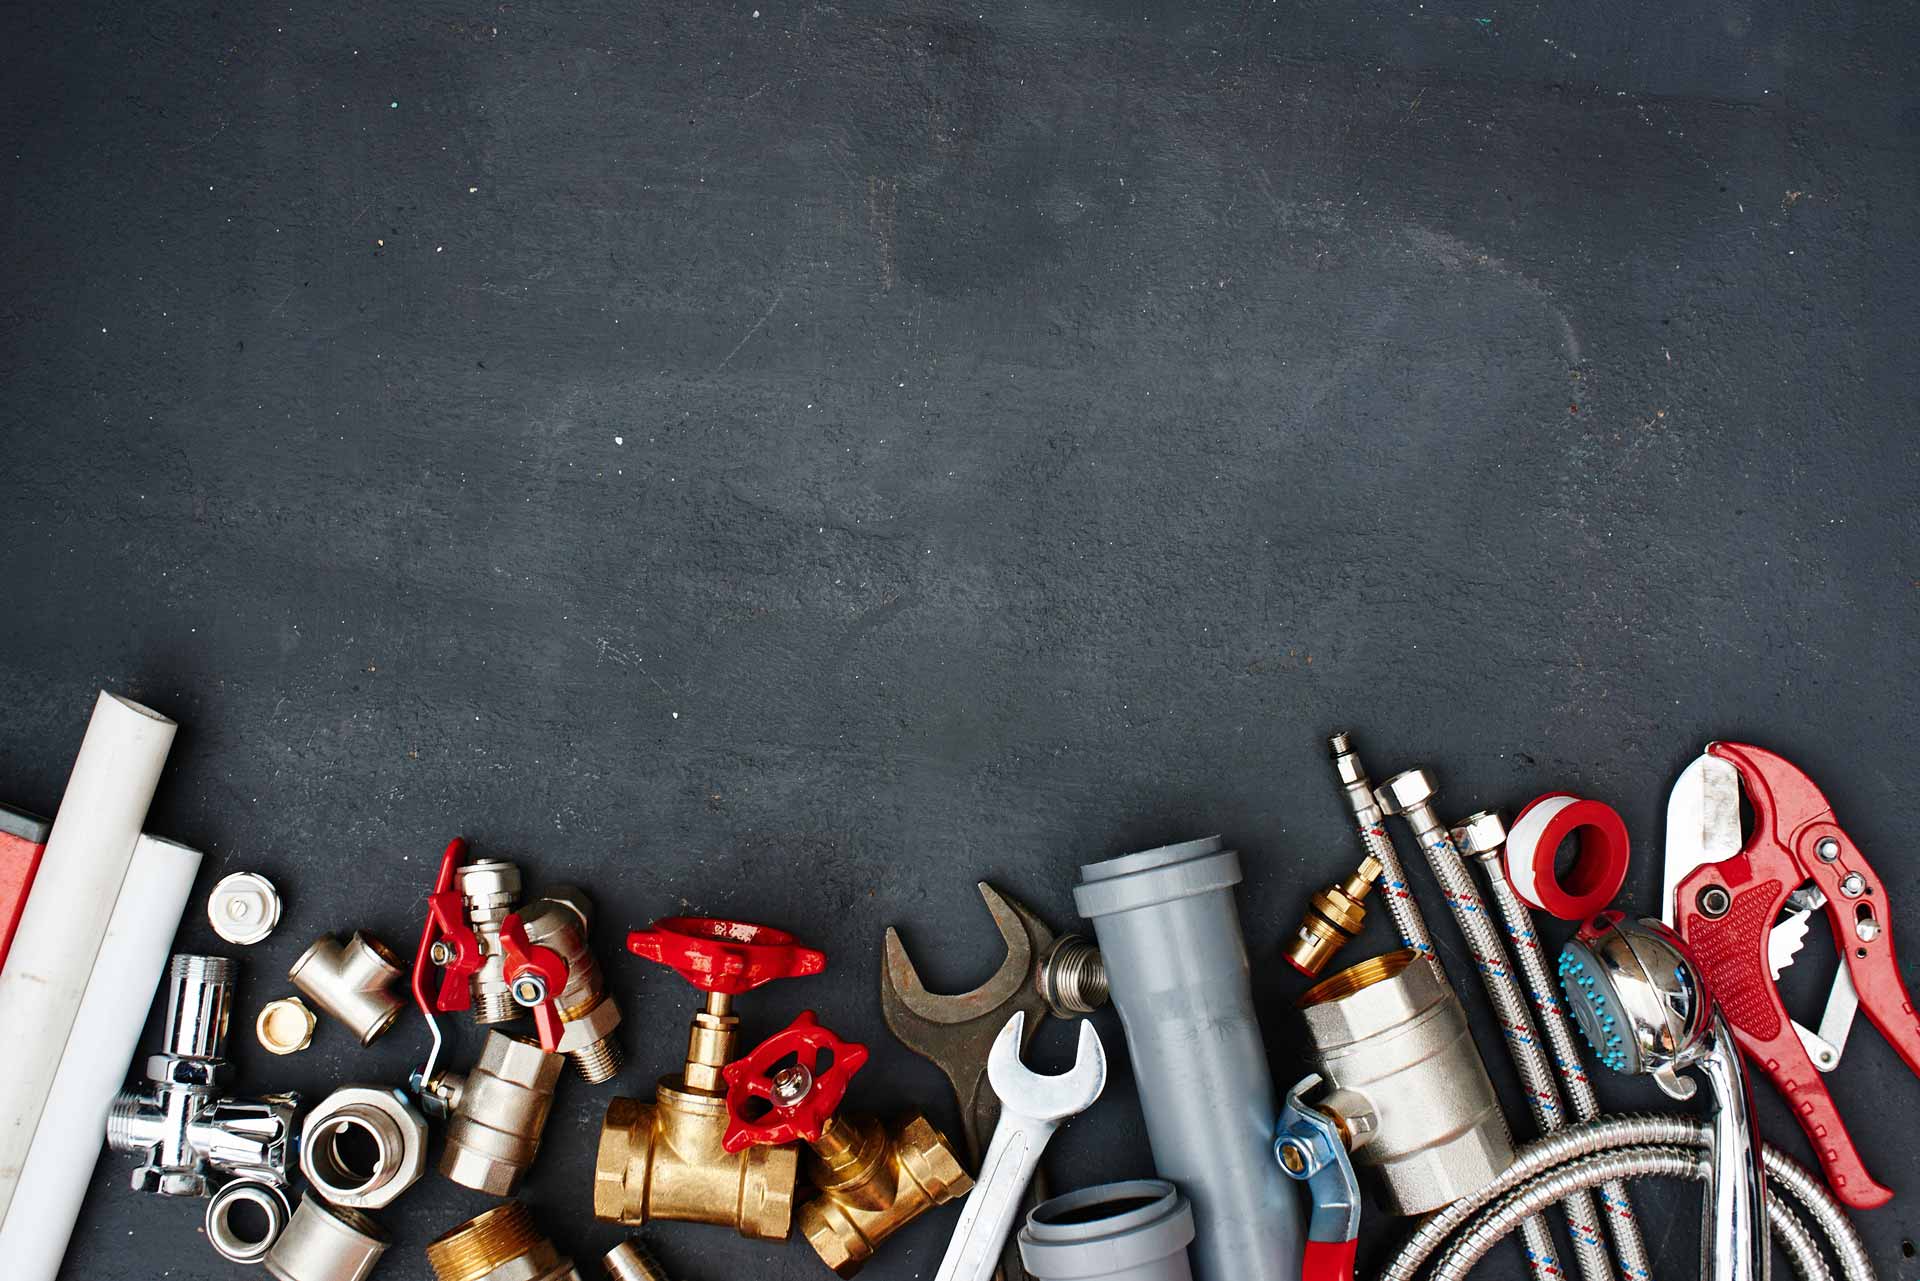 Wrenches and various plumbing supplies scattered on black background